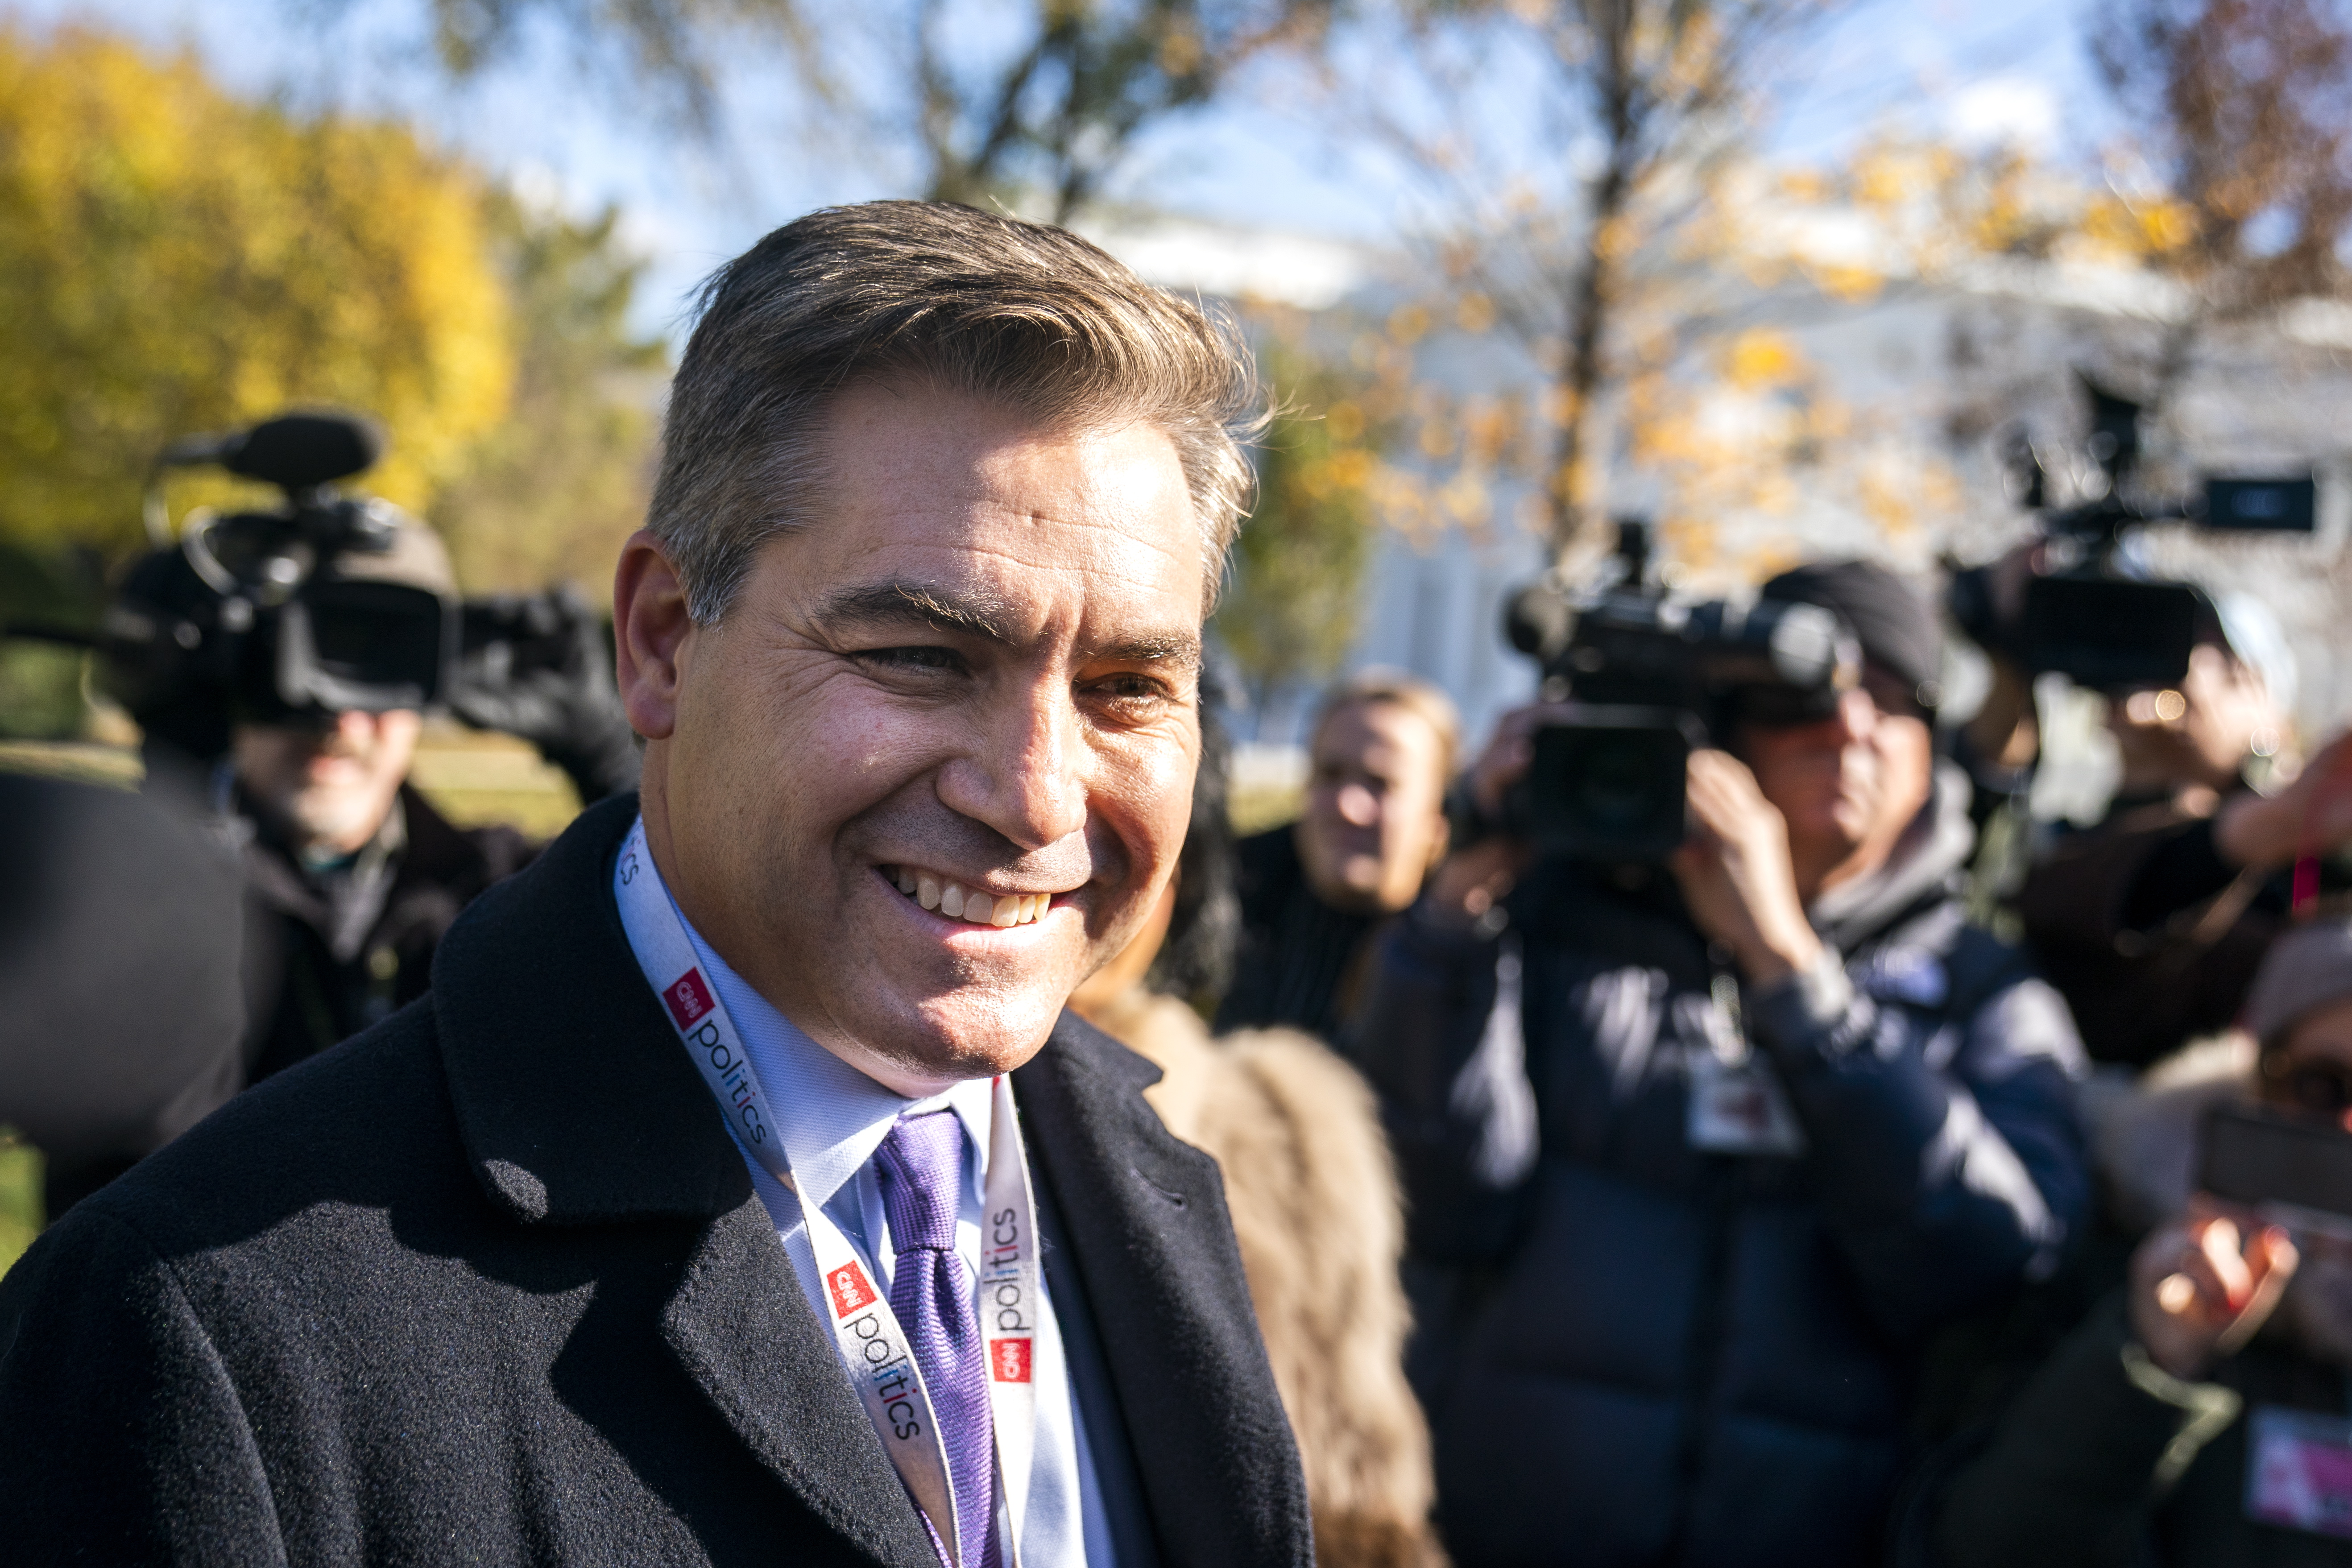 epa07170837 CNN reporter Jim Acosta returns to the White House after winning his lawsuit against the Trump administration, which had revoked his press pass, in Washington, DC, USA, 16 November 2018. Acosta and President Trump had a heated exchange during a November 07 press conference, leading to the White House pulling Acosta's White House hard pass.  EPA/JIM LO SCALZO